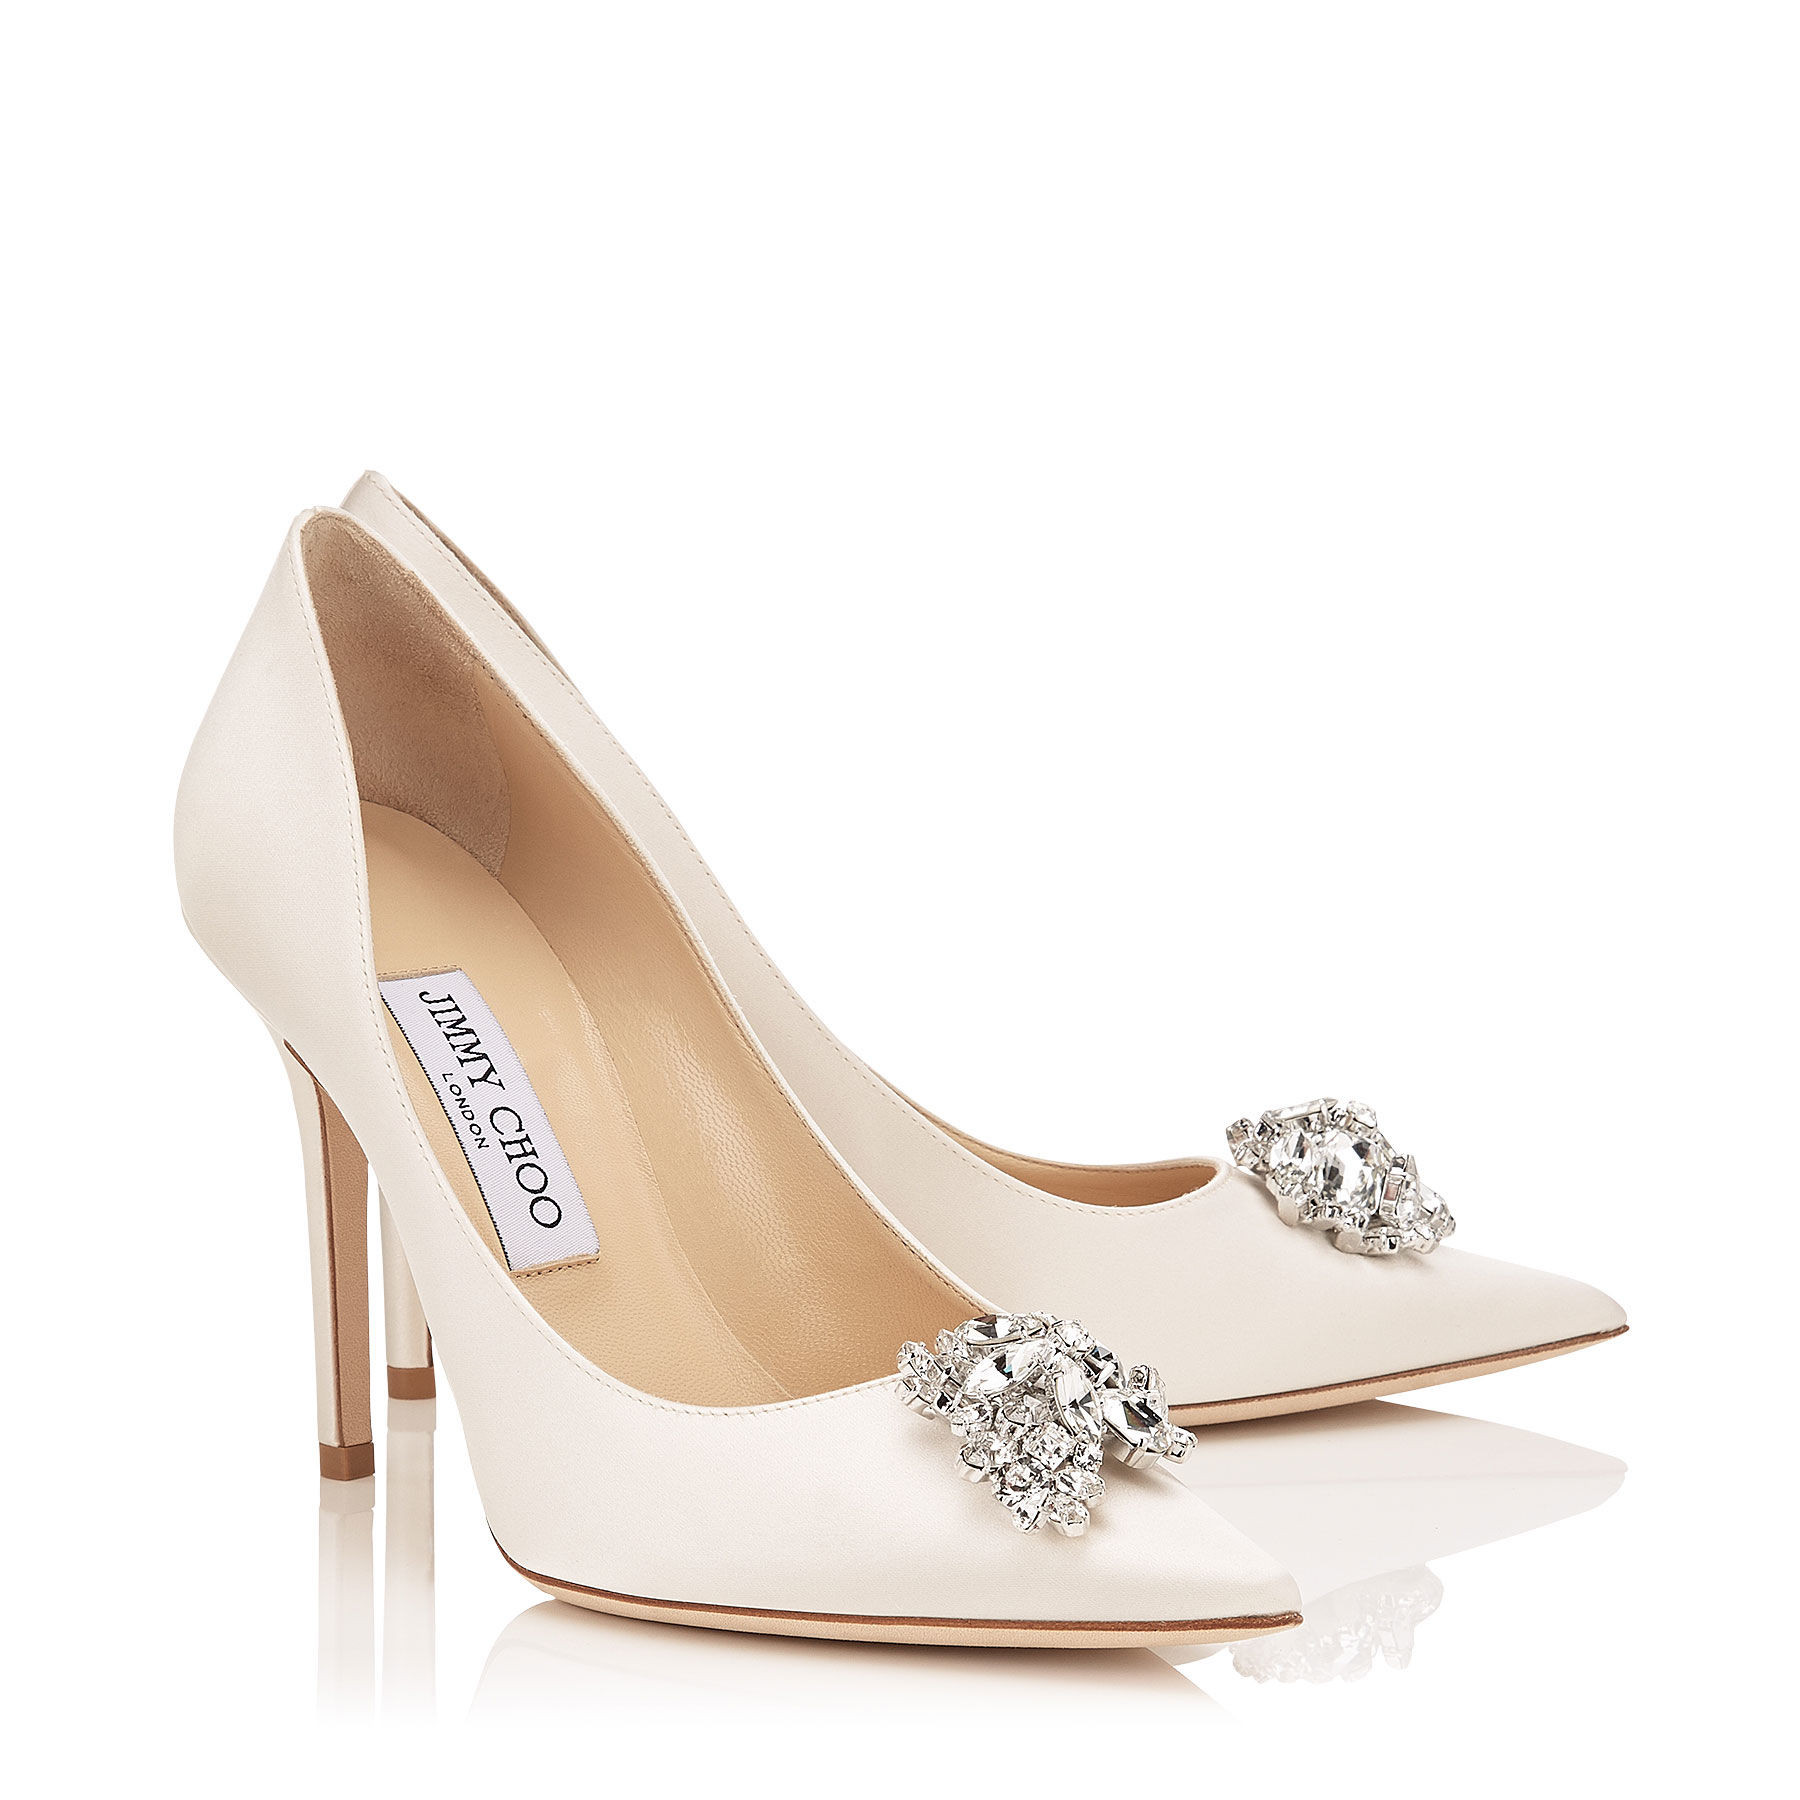 Jimmy Choo Wedding Shoes
 20 Aisle Perfect Wedding Shoes fit for a Queen Aisle Perfect